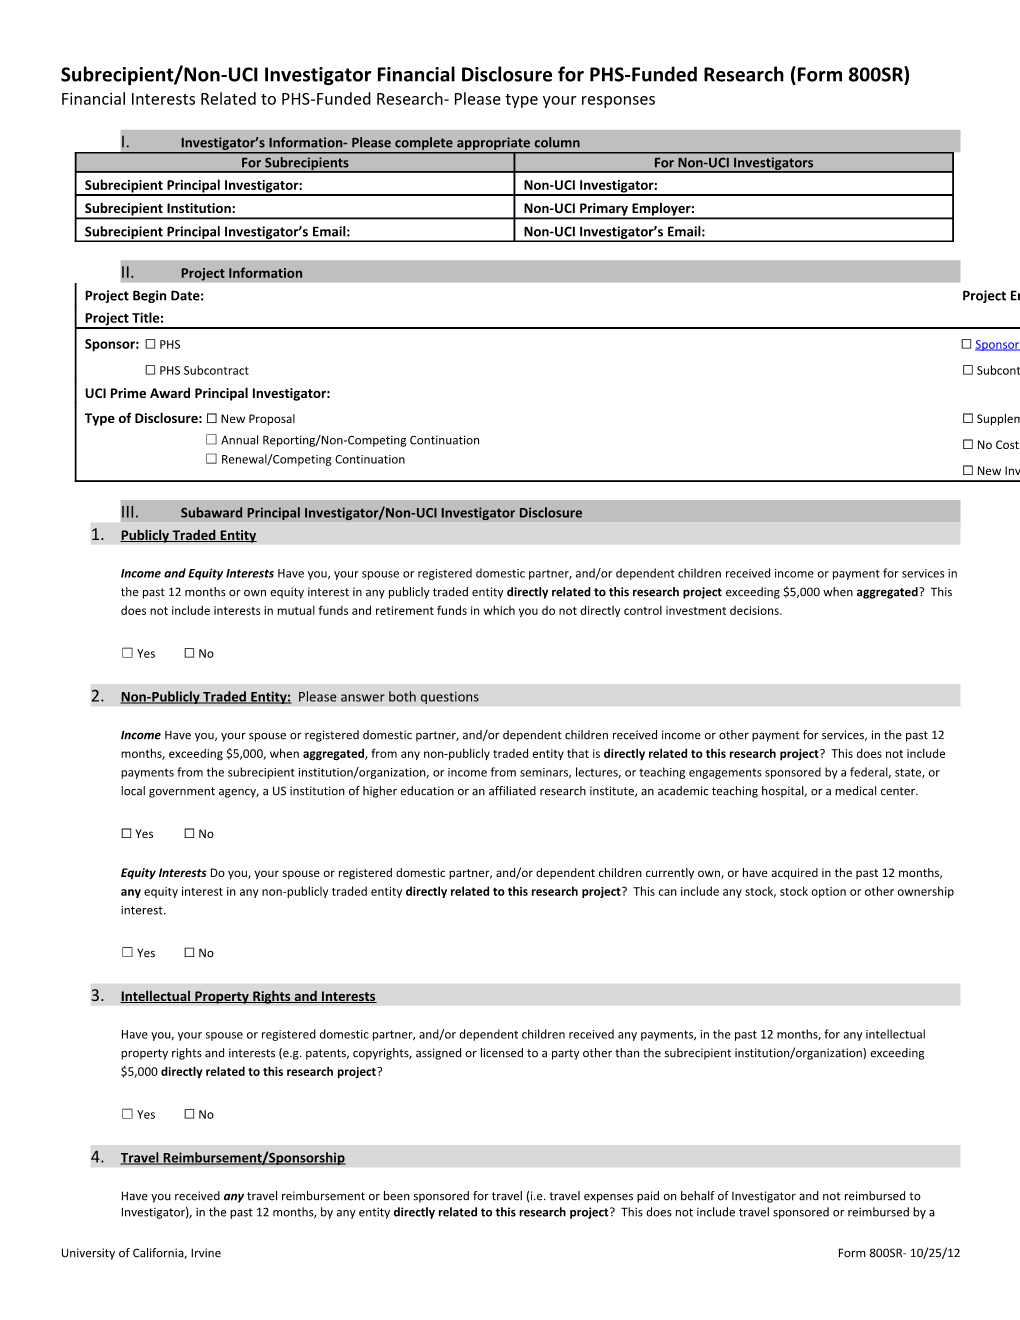 Subrecipient/Non-UCI Investigator Financial Disclosure for PHS-Funded Research (Form 800SR)